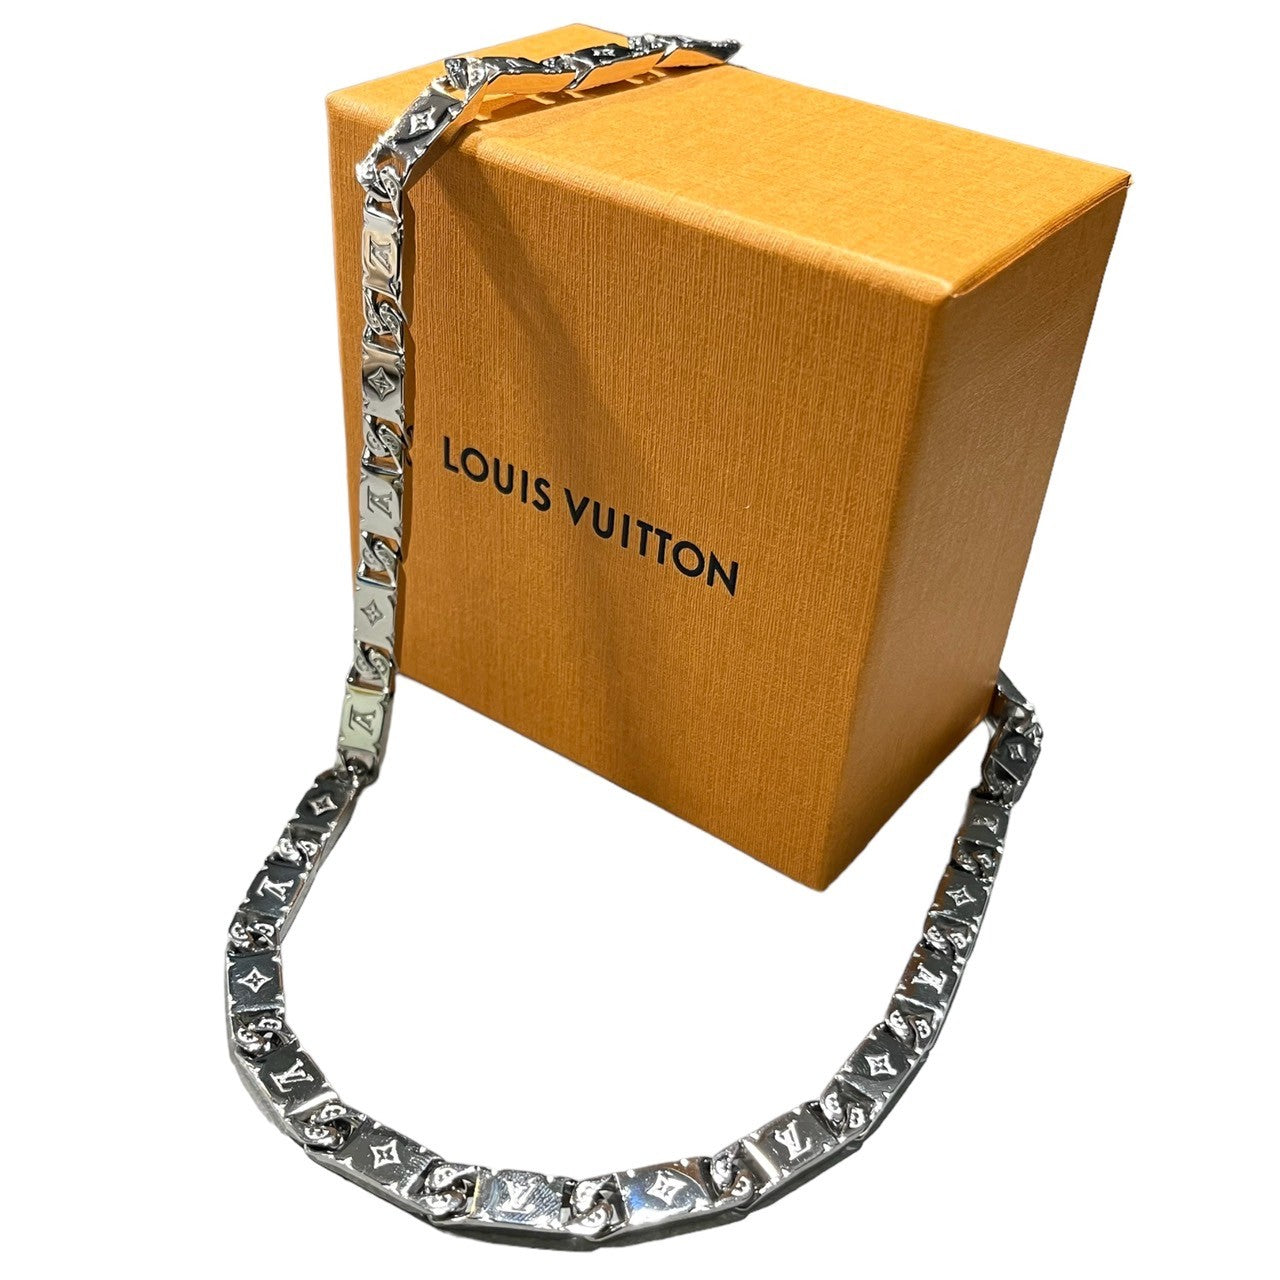 LOUIS VUITTON(ルイヴィトン) coll mng tied silver コリエ モノグラム タイドアップ ネックレス モノグラム  M00919 シルバーカラー 製造番号:AK2203